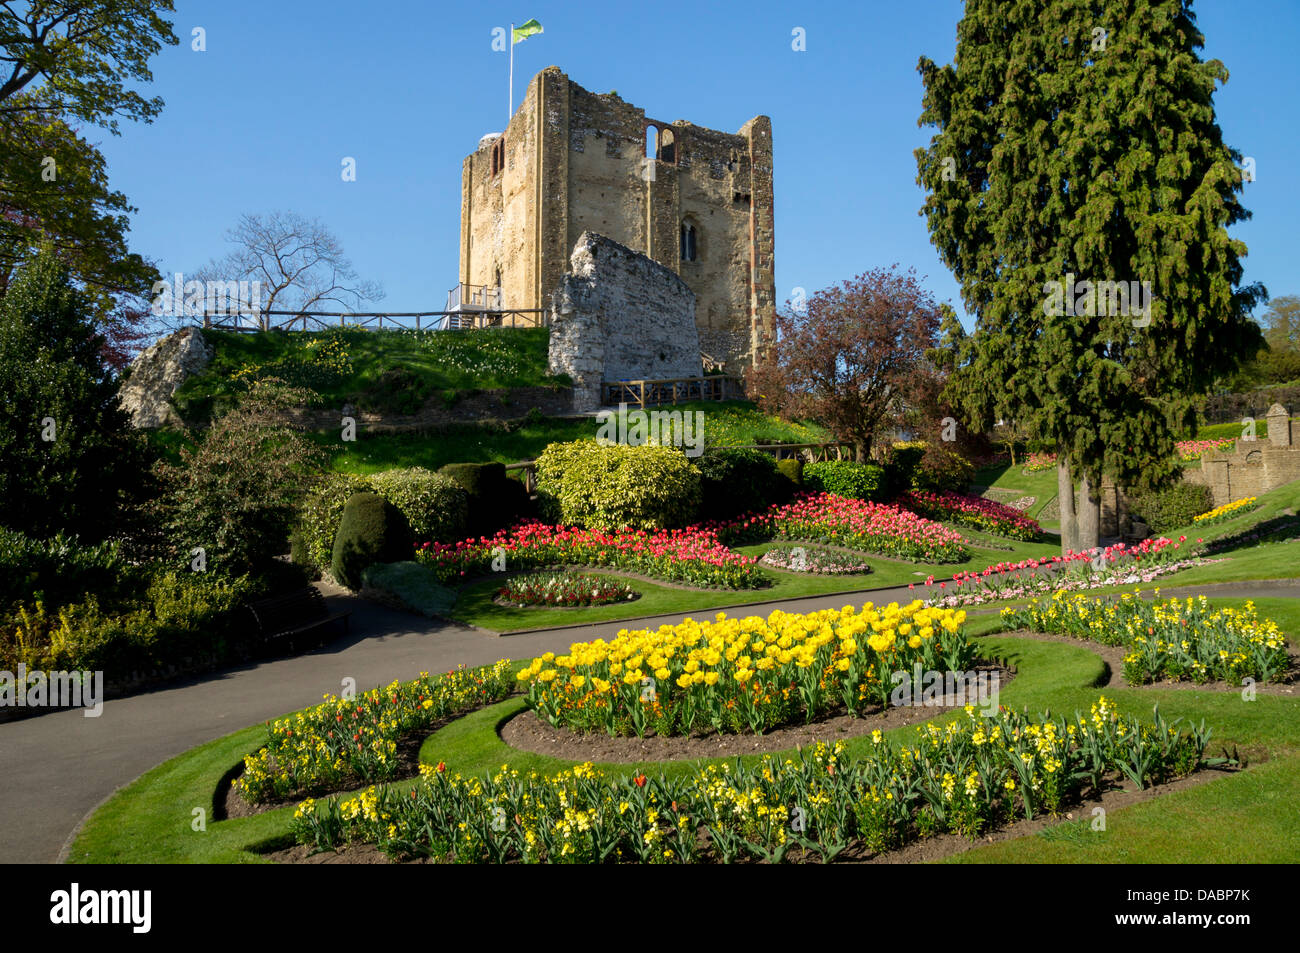 Spring flowers in ornamental beds decorate Guildford Castle, Guildford, Surrey, England, United Kingdom, Europe Stock Photo